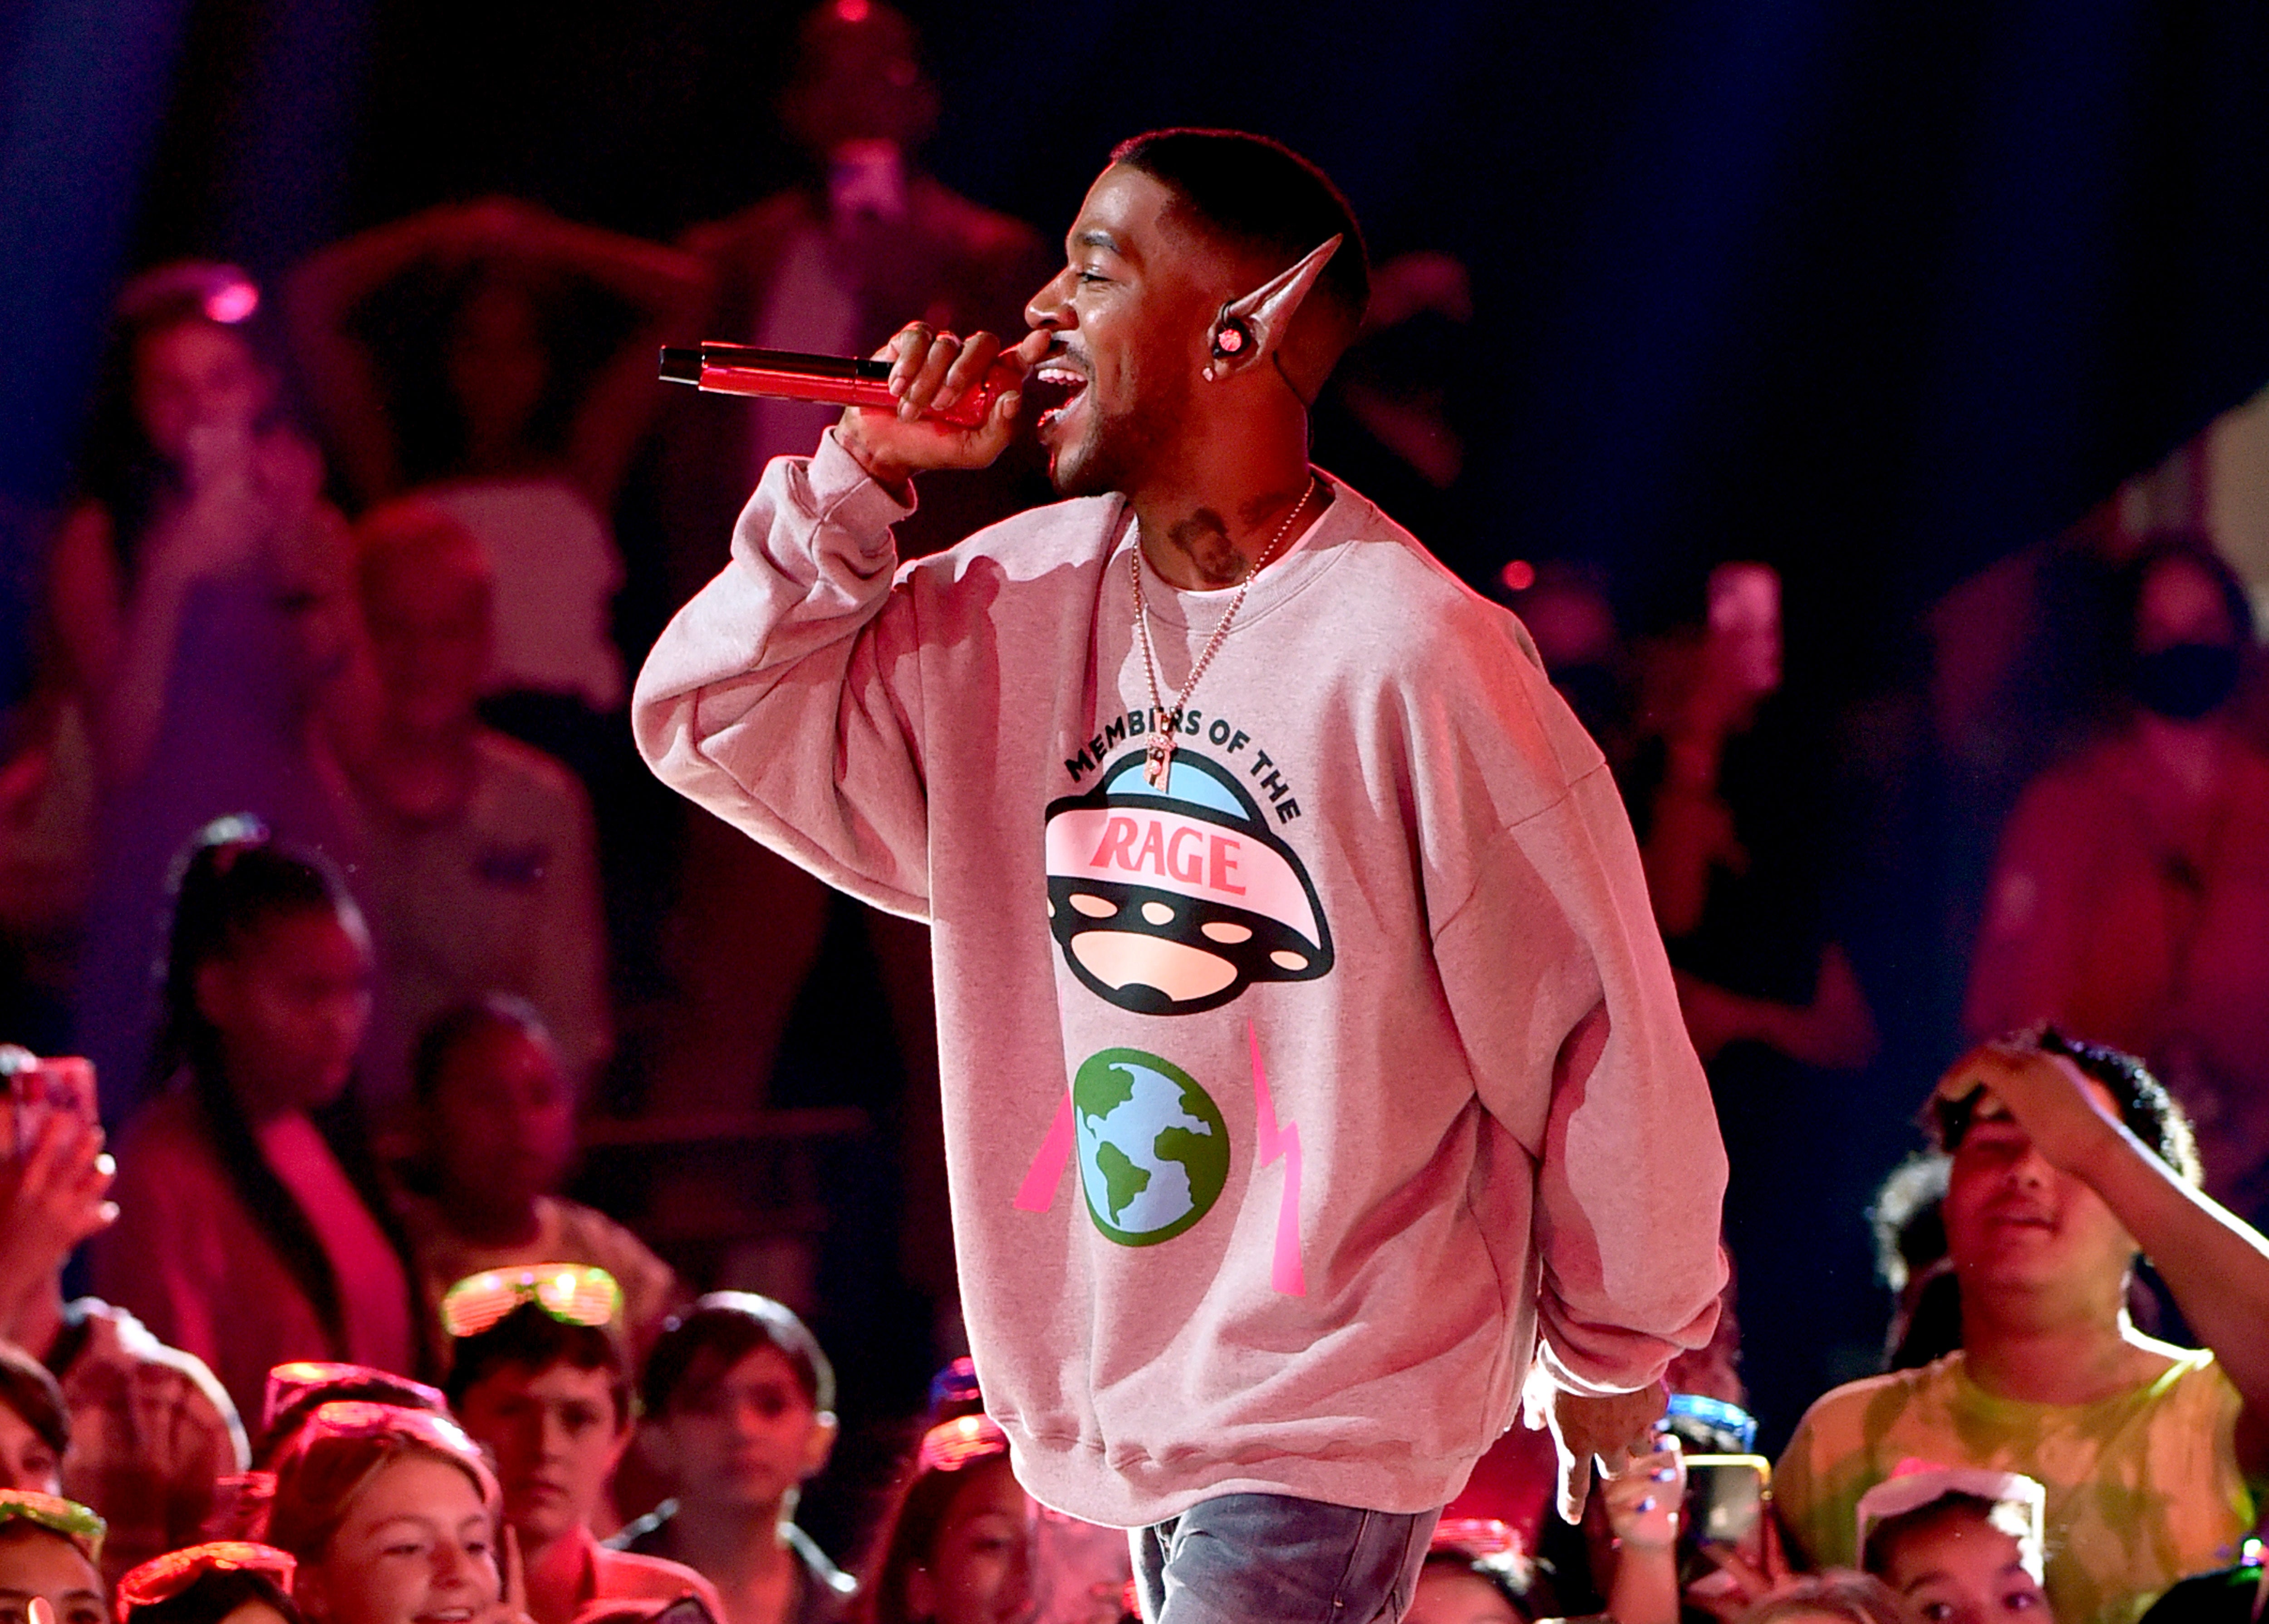 Nine months after hints he would perform his 2021 album Man on the Moon III: The Chosen on the road, tickets for Kid Cudi’s 2022 world tour are set for release